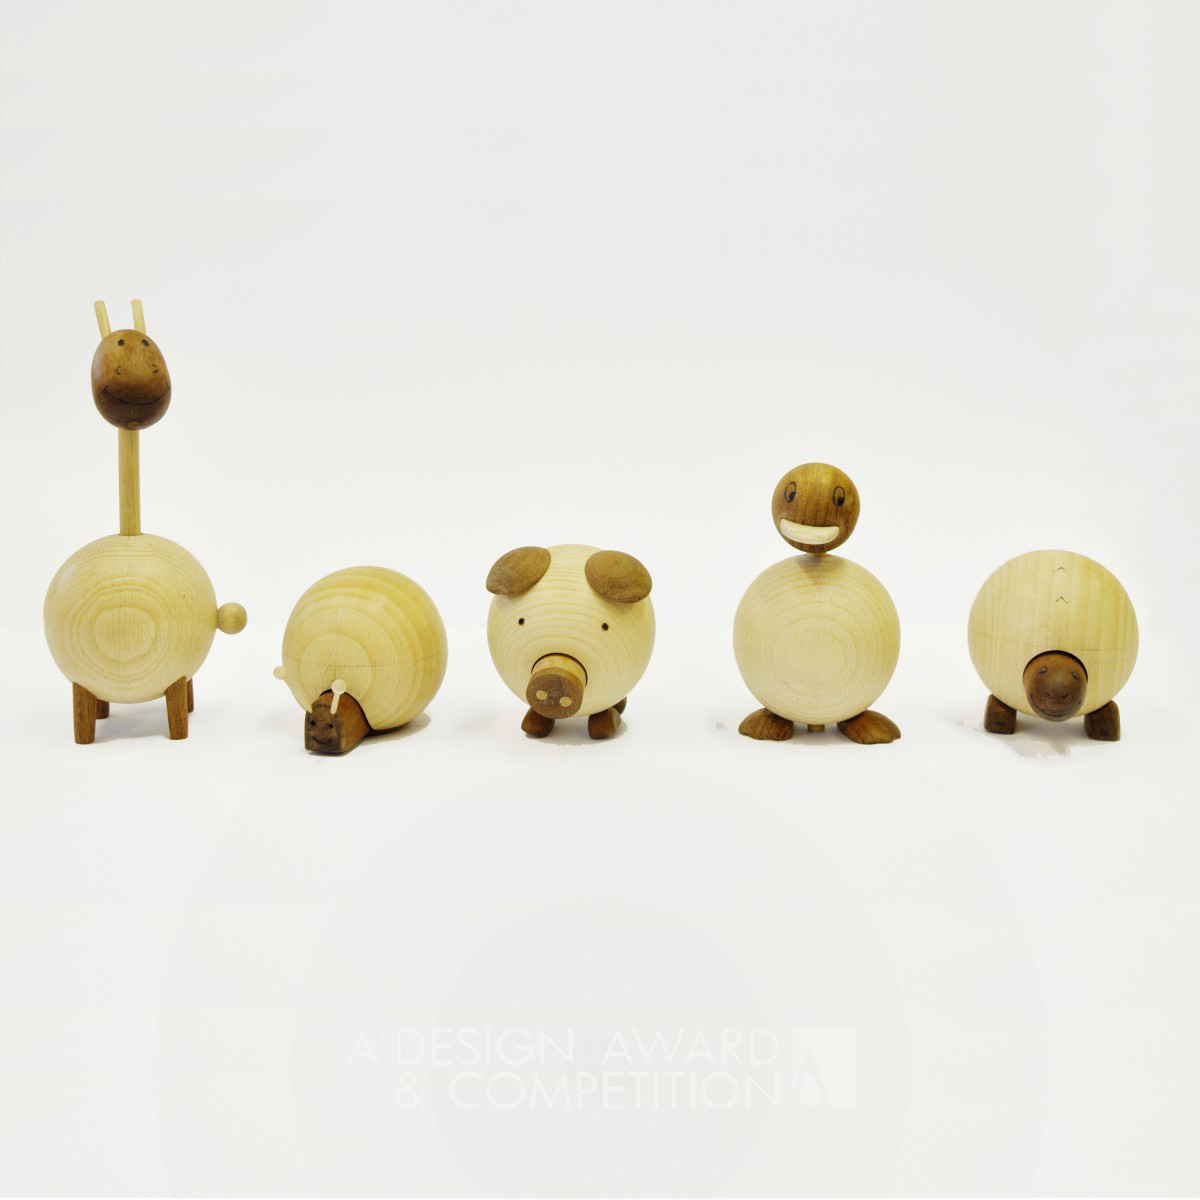 Movable wooden animals